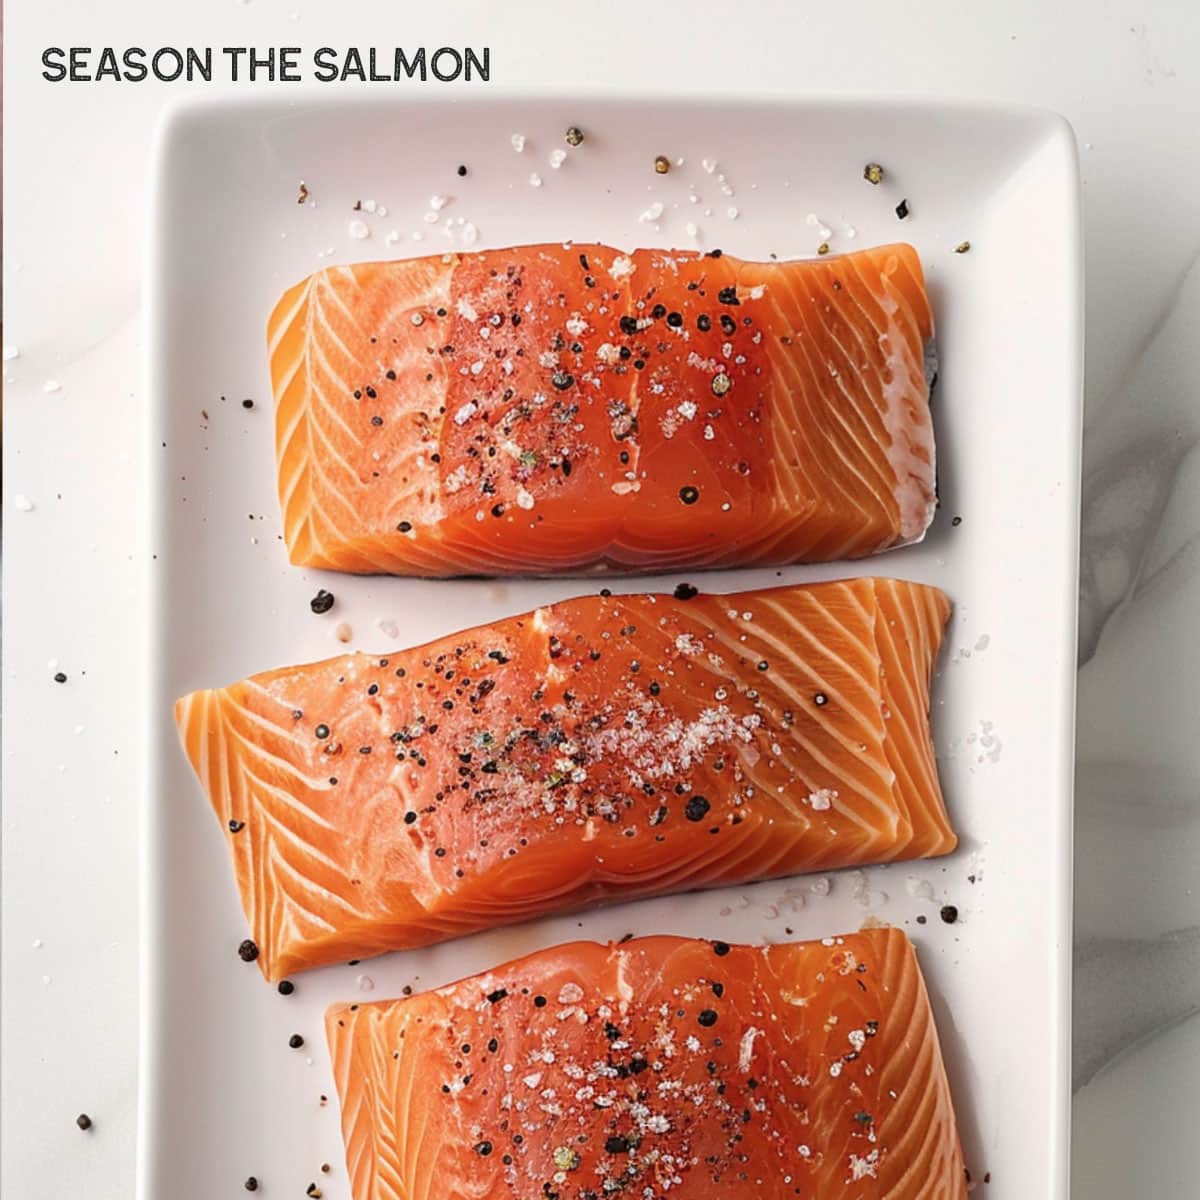 Get that perfect sear! Season your salmon generously with salt and pepper.